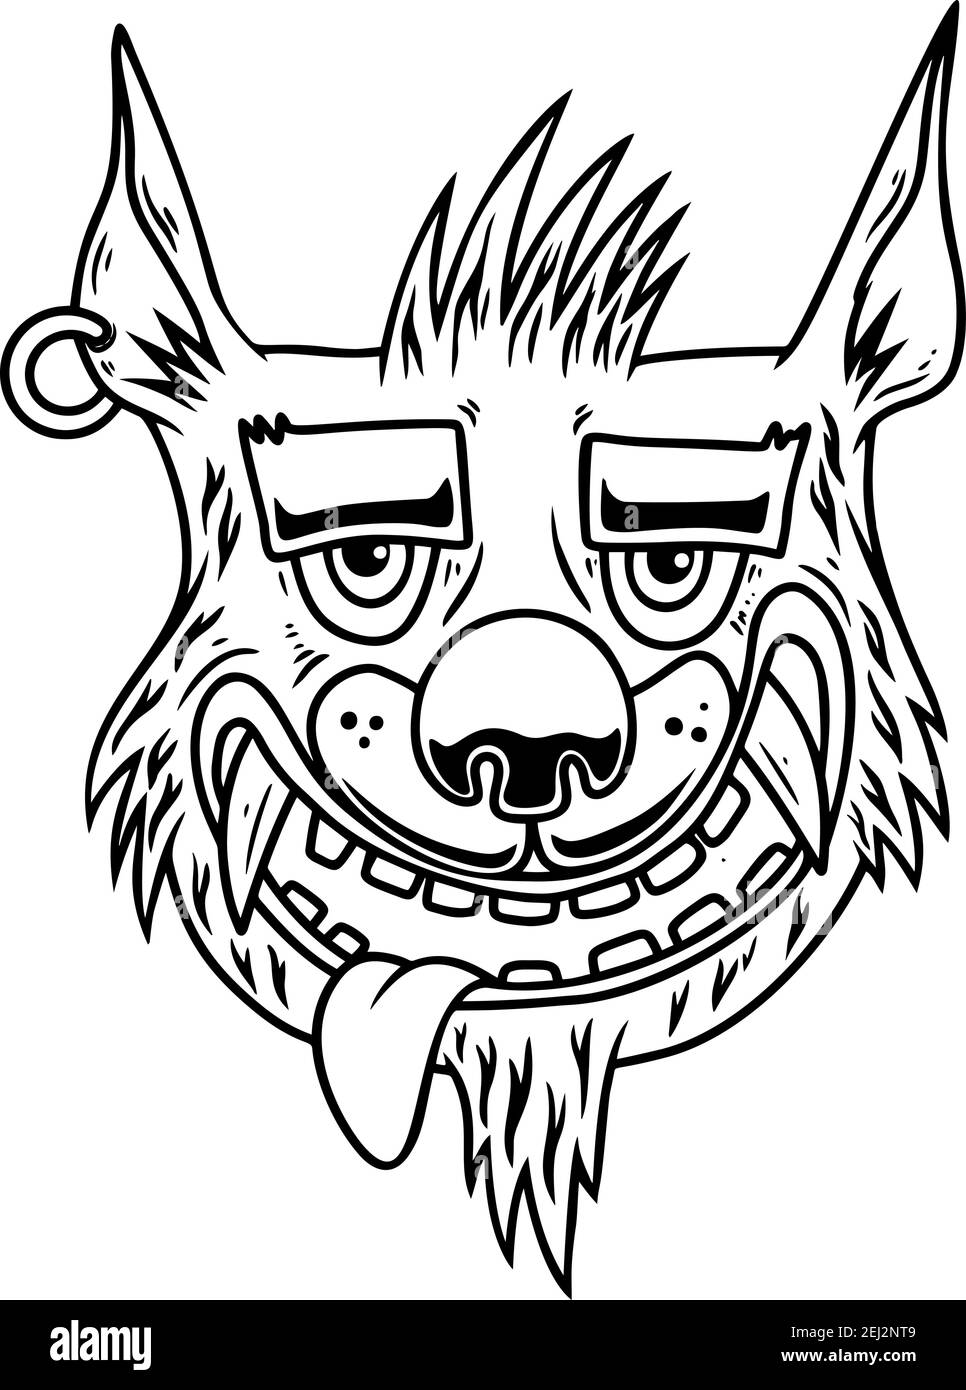 Illustration of head of funny cartoon wolf. Design element for poster ...